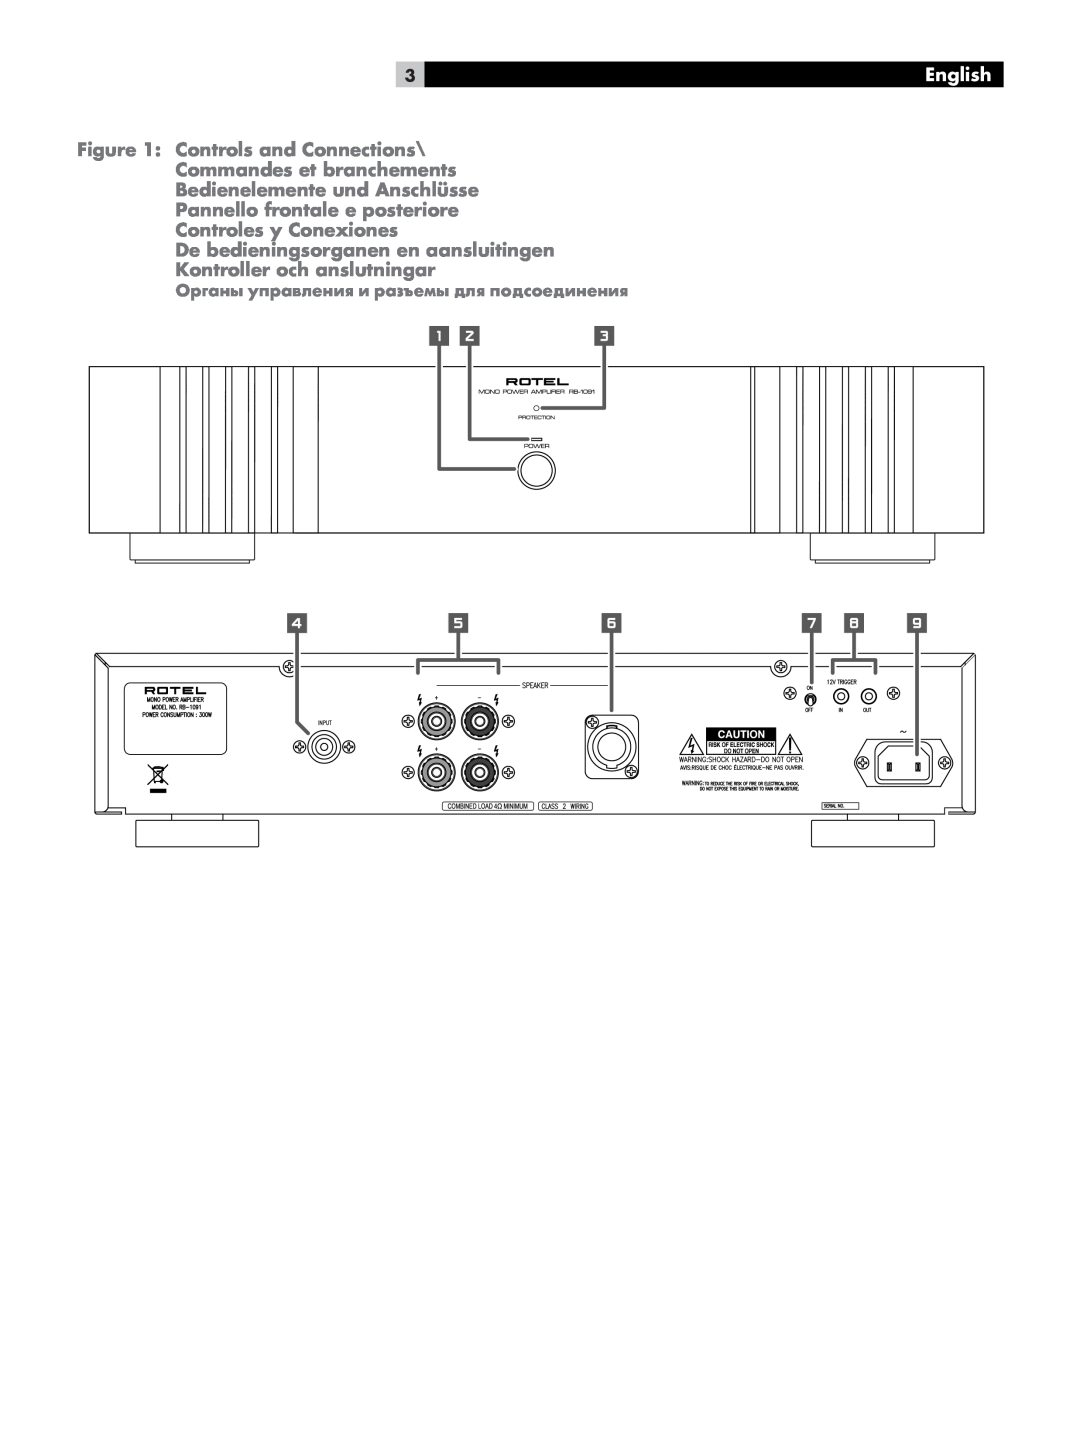 Rotel RB-1091 owner manual English, Controls and Connections, Commandes et branchements, Bedienelemente und Anschlüsse 